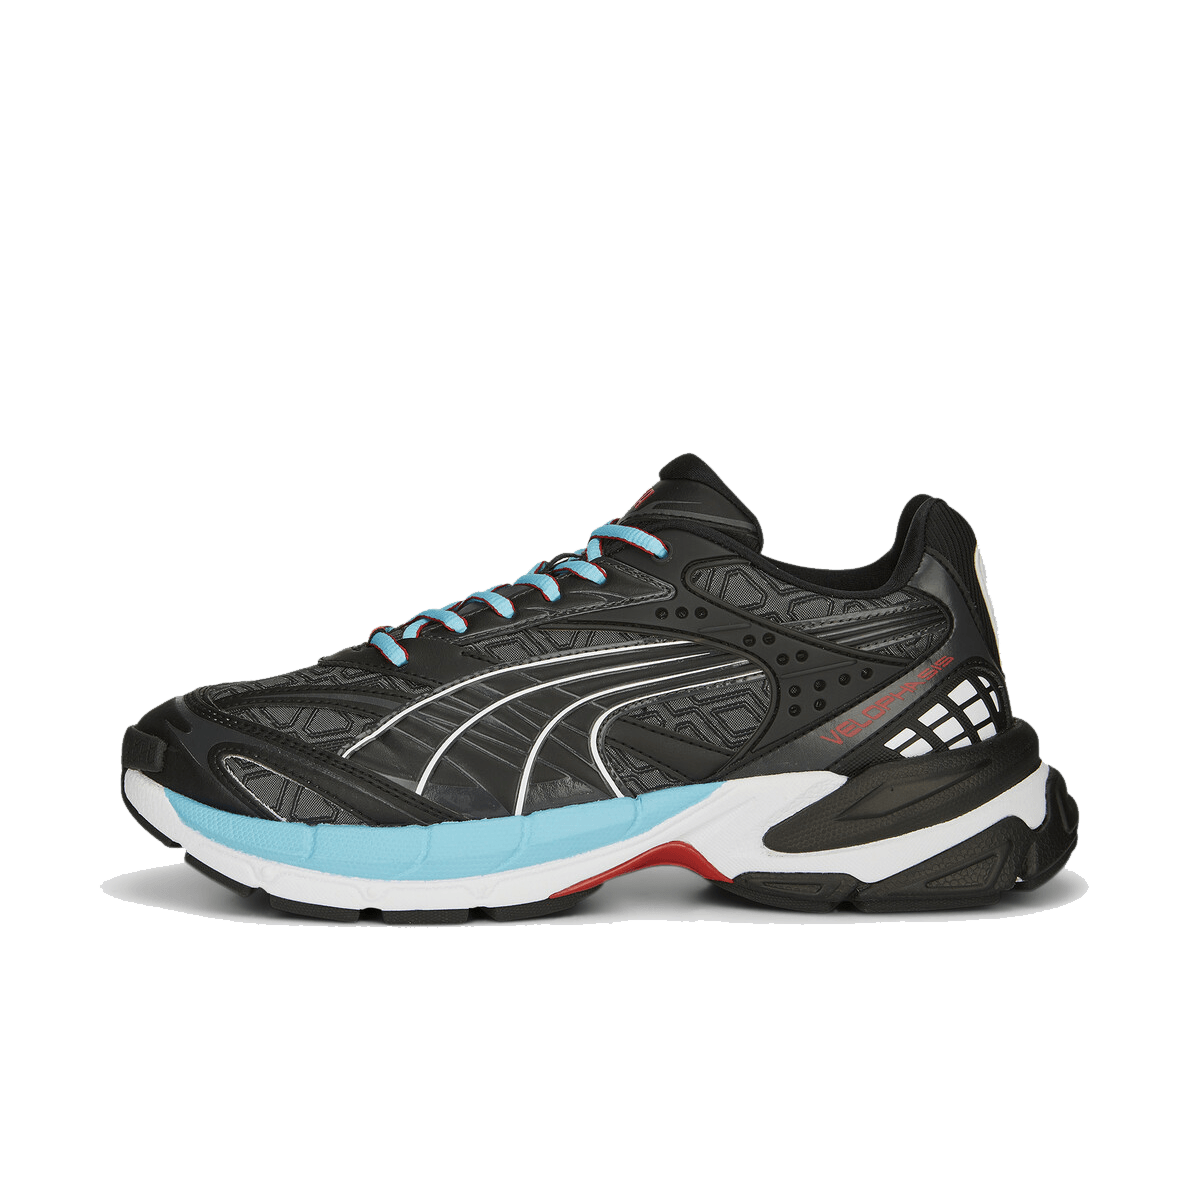 Puma Velophasis Luxe Sport 'Black Turquoise' 390537_01